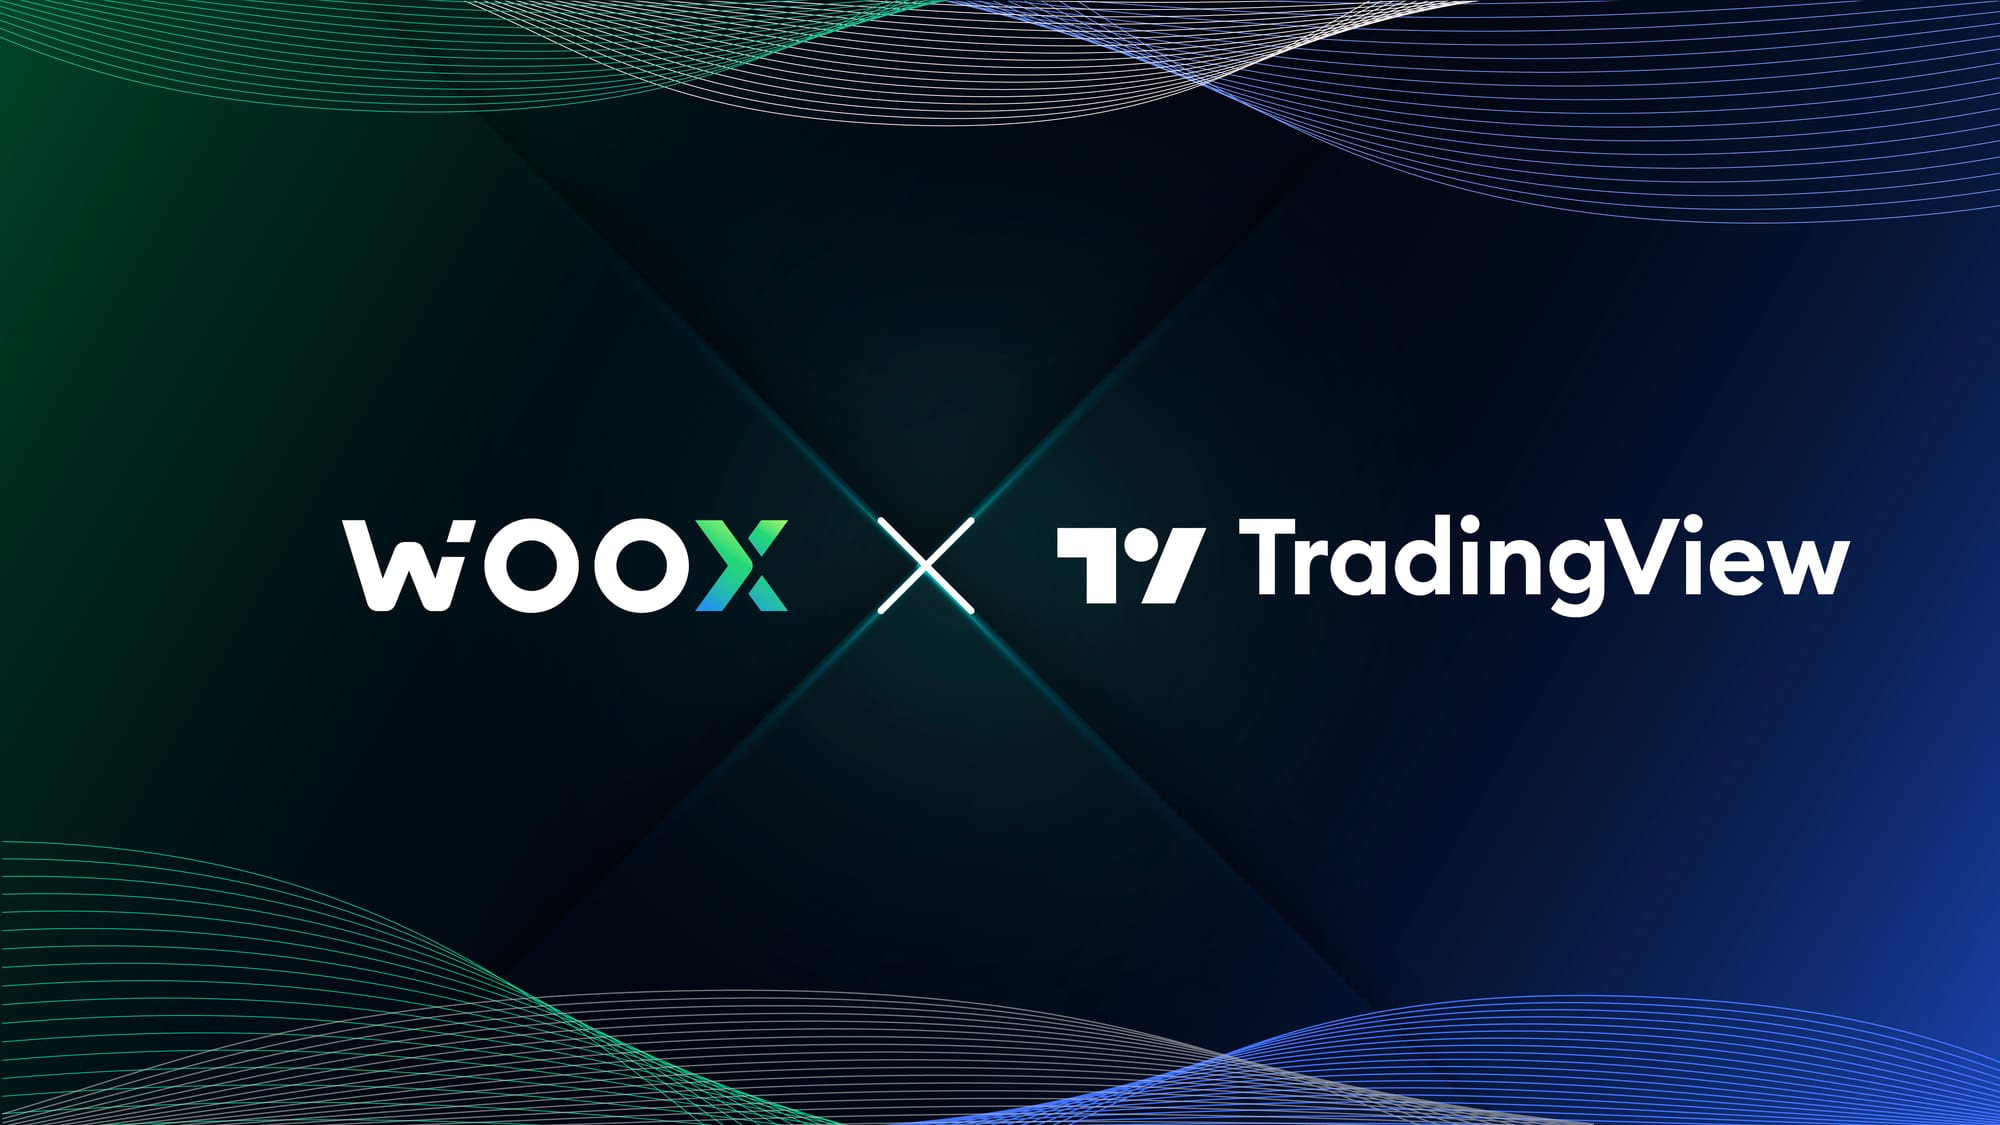 WOO X upgrades to the latest version of TradingView for optimal trading experience